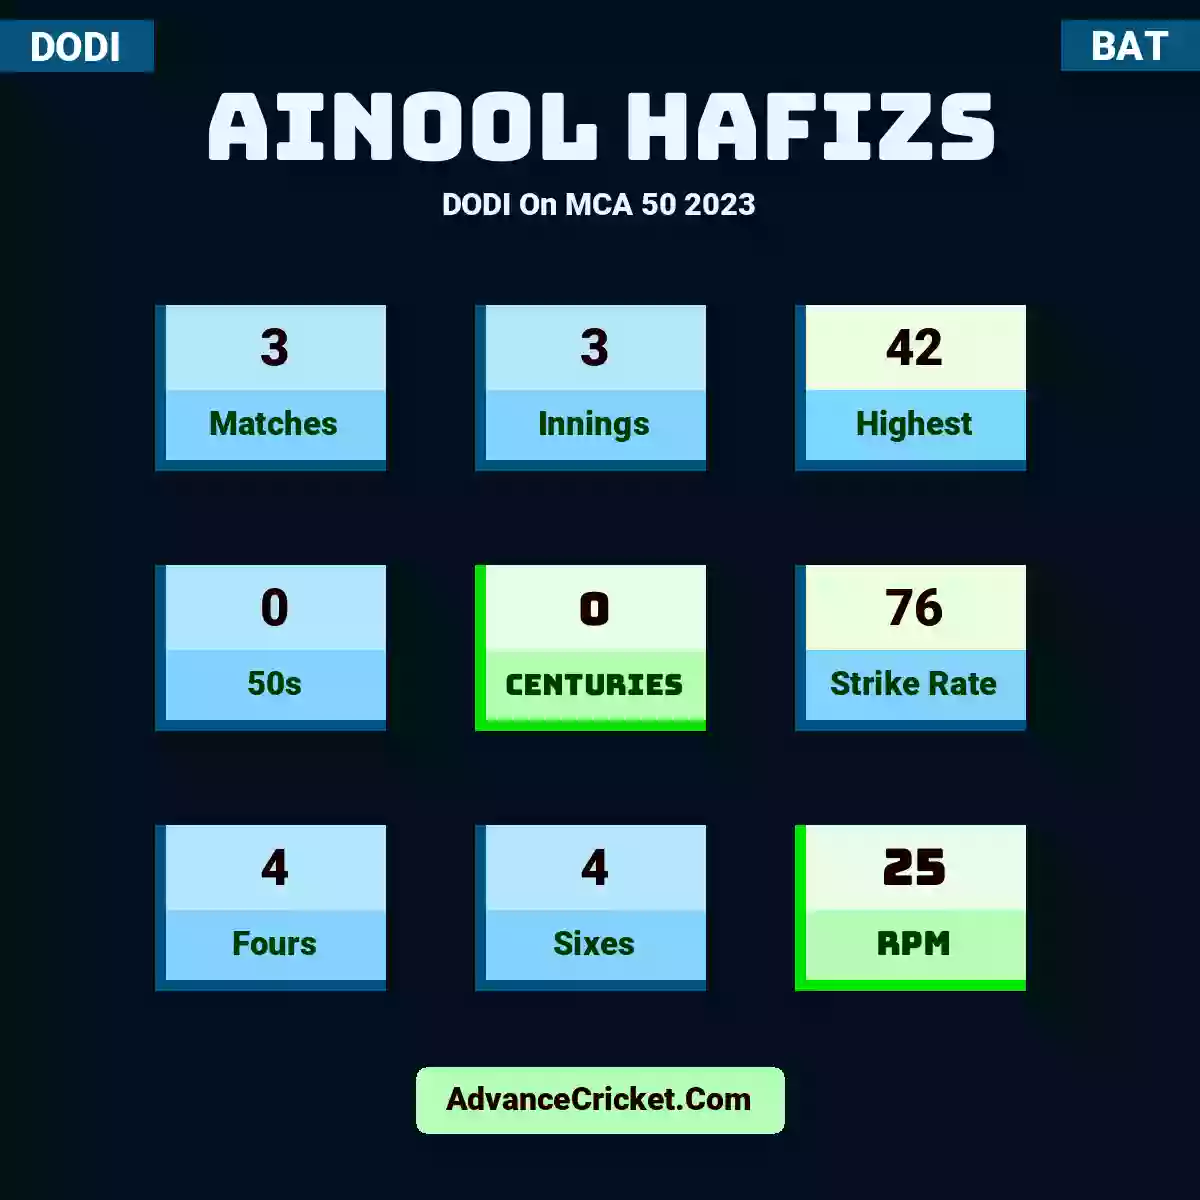 Ainool Hafizs DODI  On MCA 50 2023, Ainool Hafizs played 3 matches, scored 42 runs as highest, 0 half-centuries, and 0 centuries, with a strike rate of 76. A.Hafizs hit 4 fours and 4 sixes, with an RPM of 25.